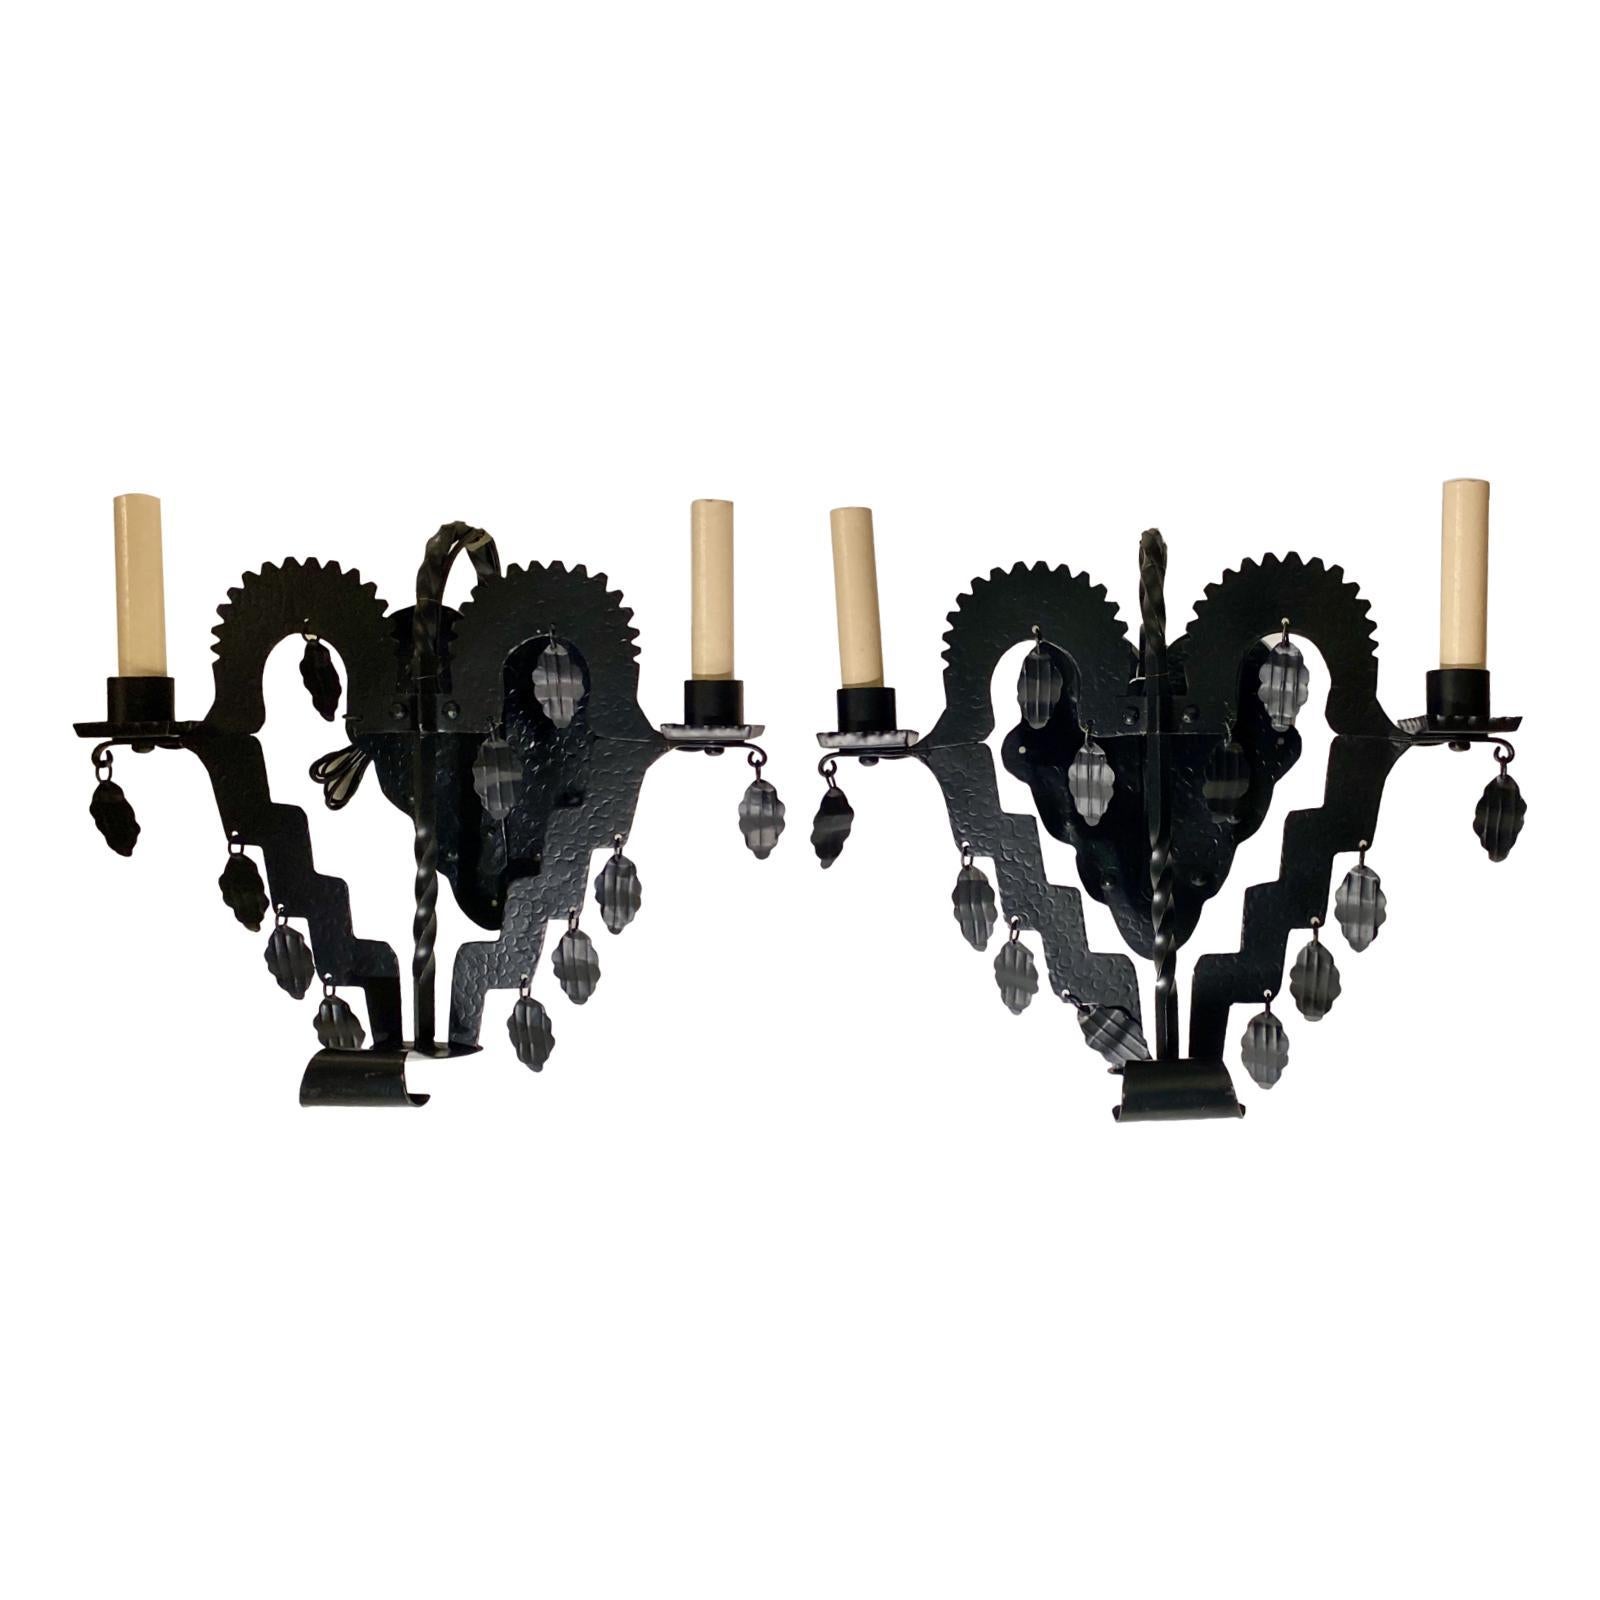 Set of eight English circa 1920's hammered iron arts and crafts wrought iron two-arm sconces with pendant leaf-shaped decorations. Sold per pair.

Measurements:
Height: 13